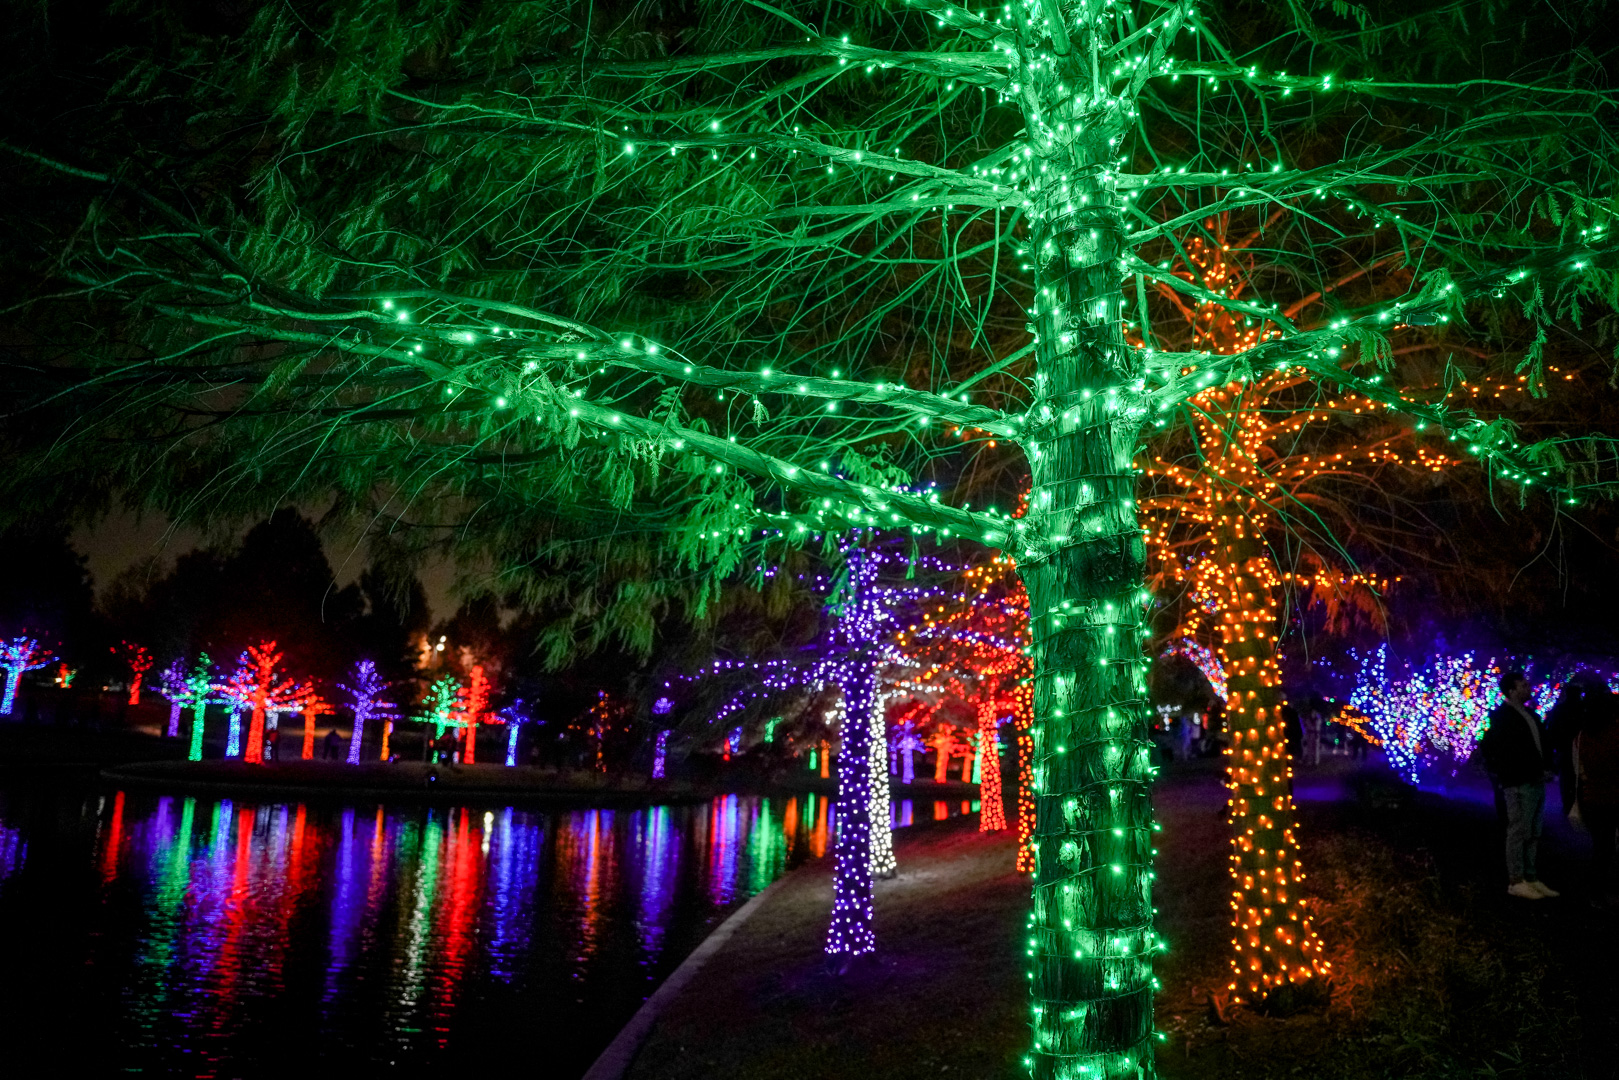 Trees along a pond lit up with Christmas lights